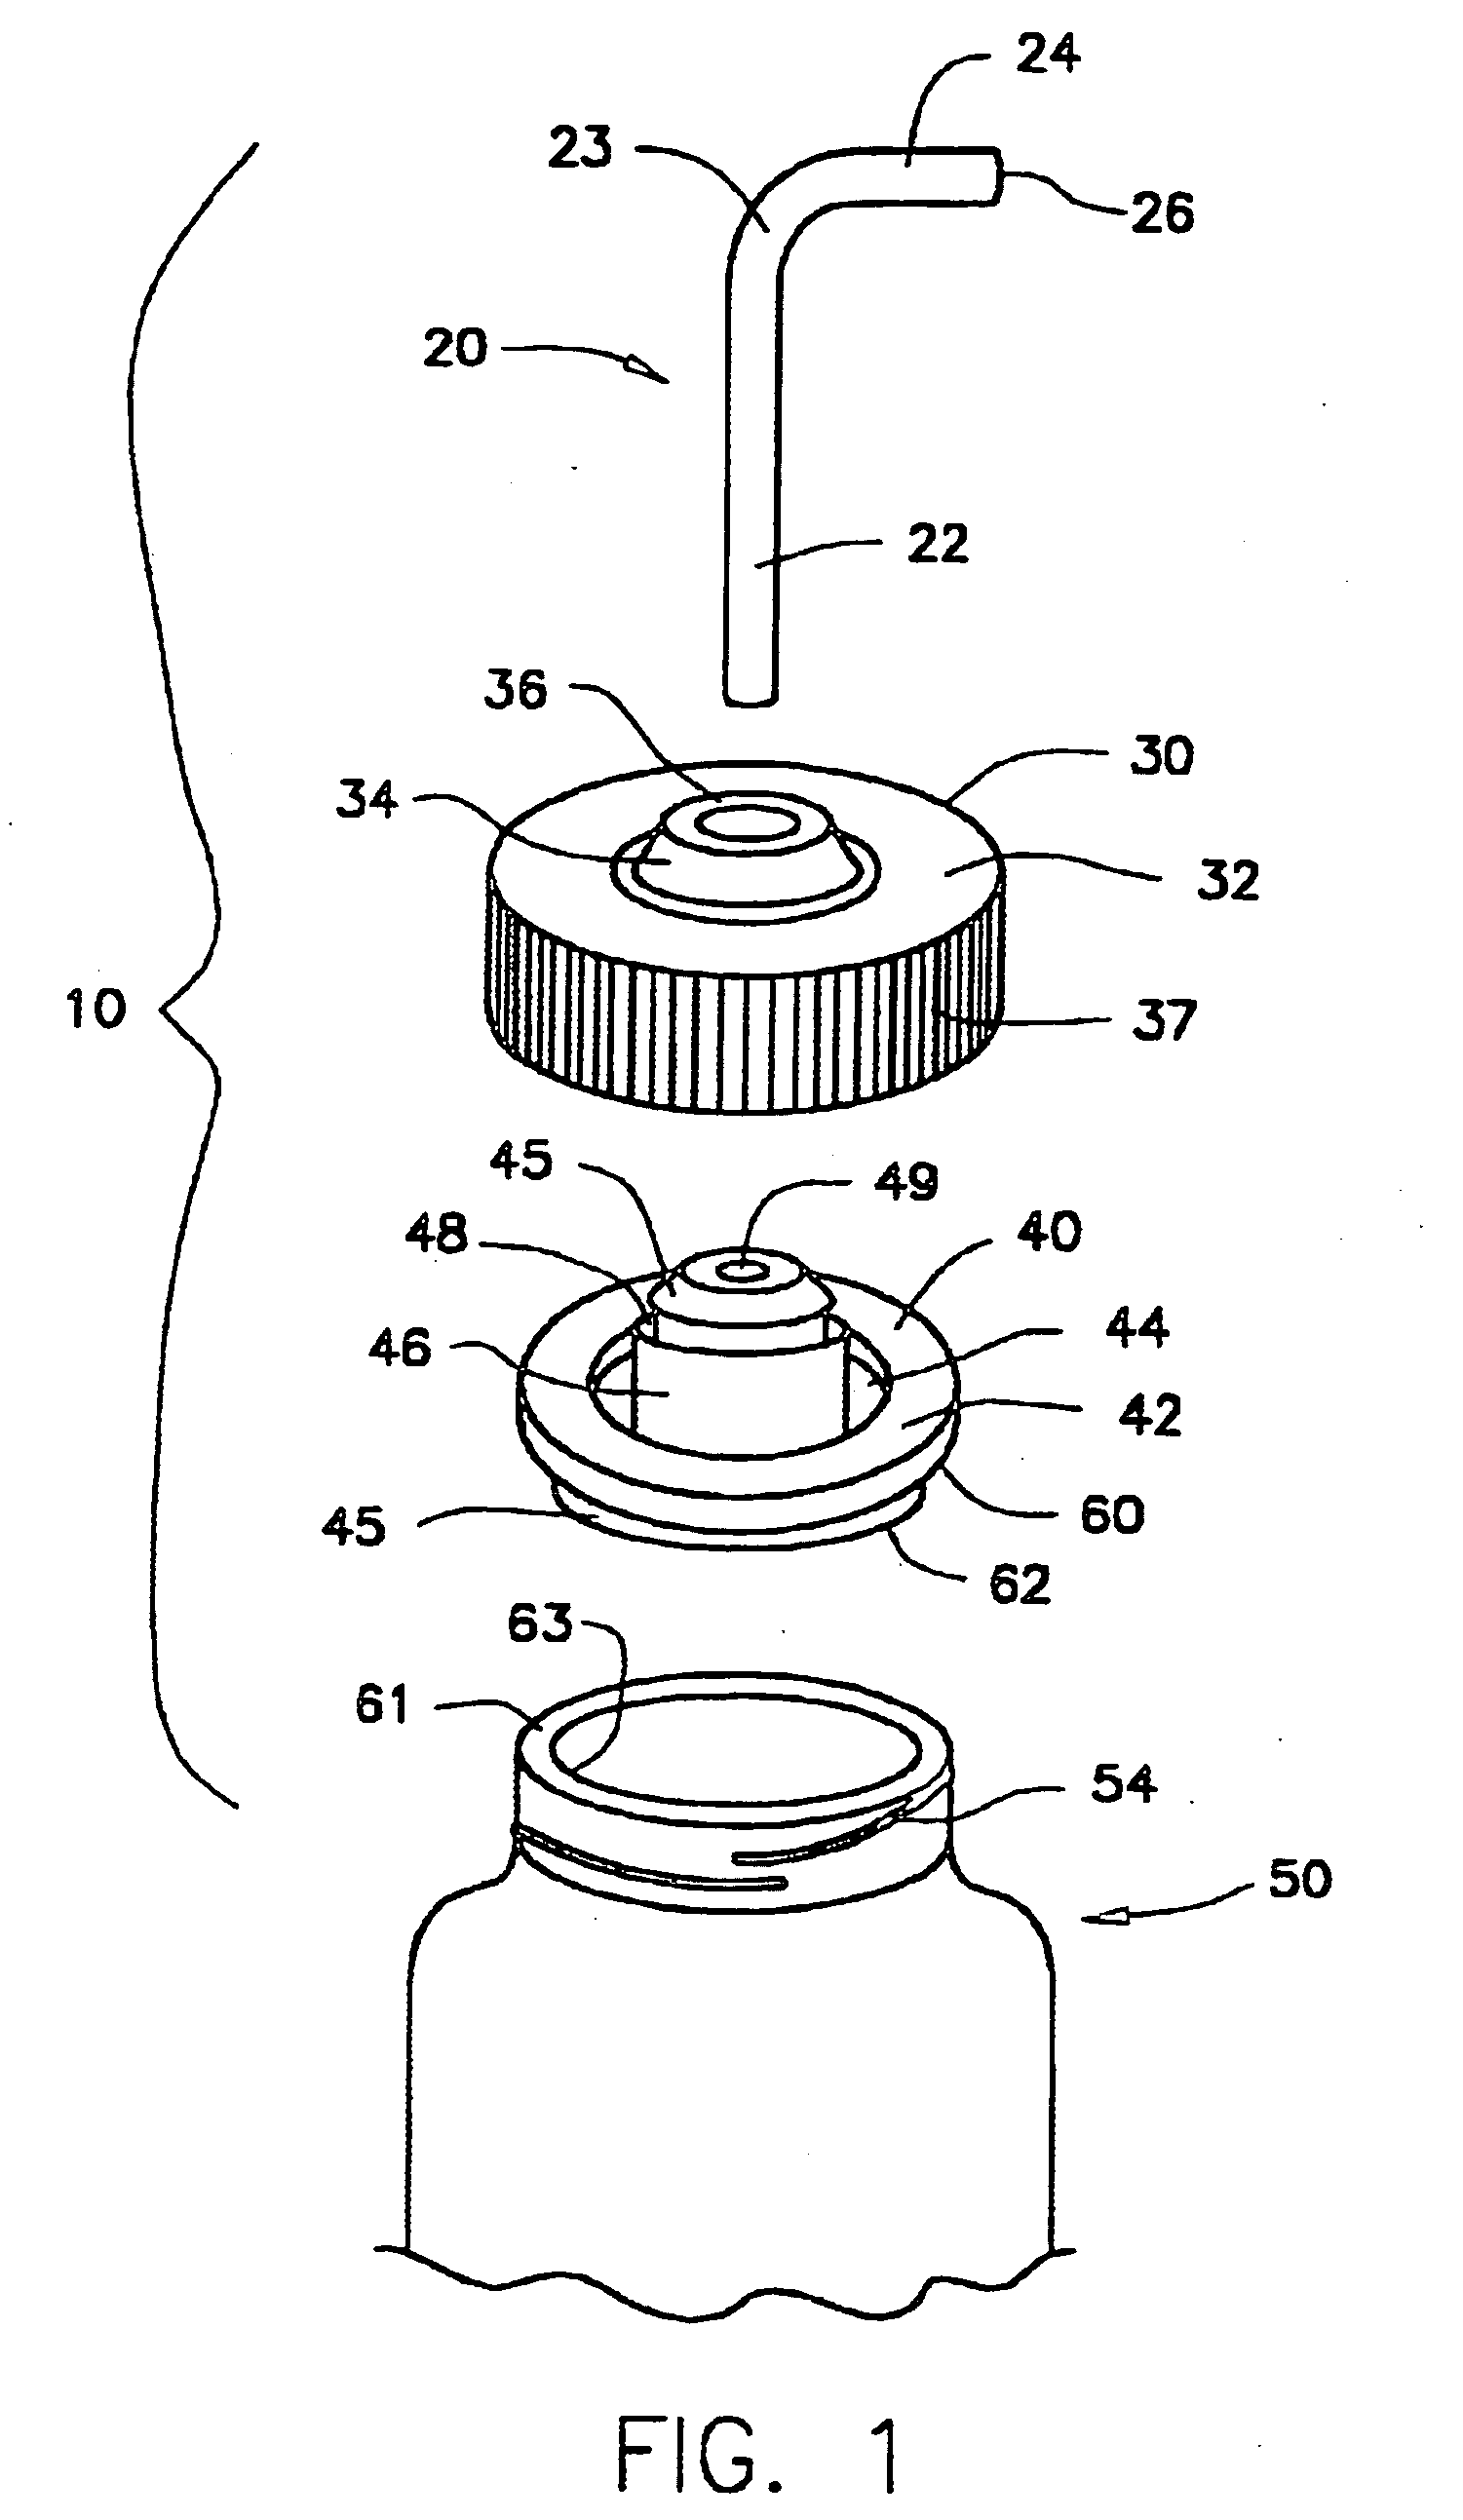 Removable cap assembly